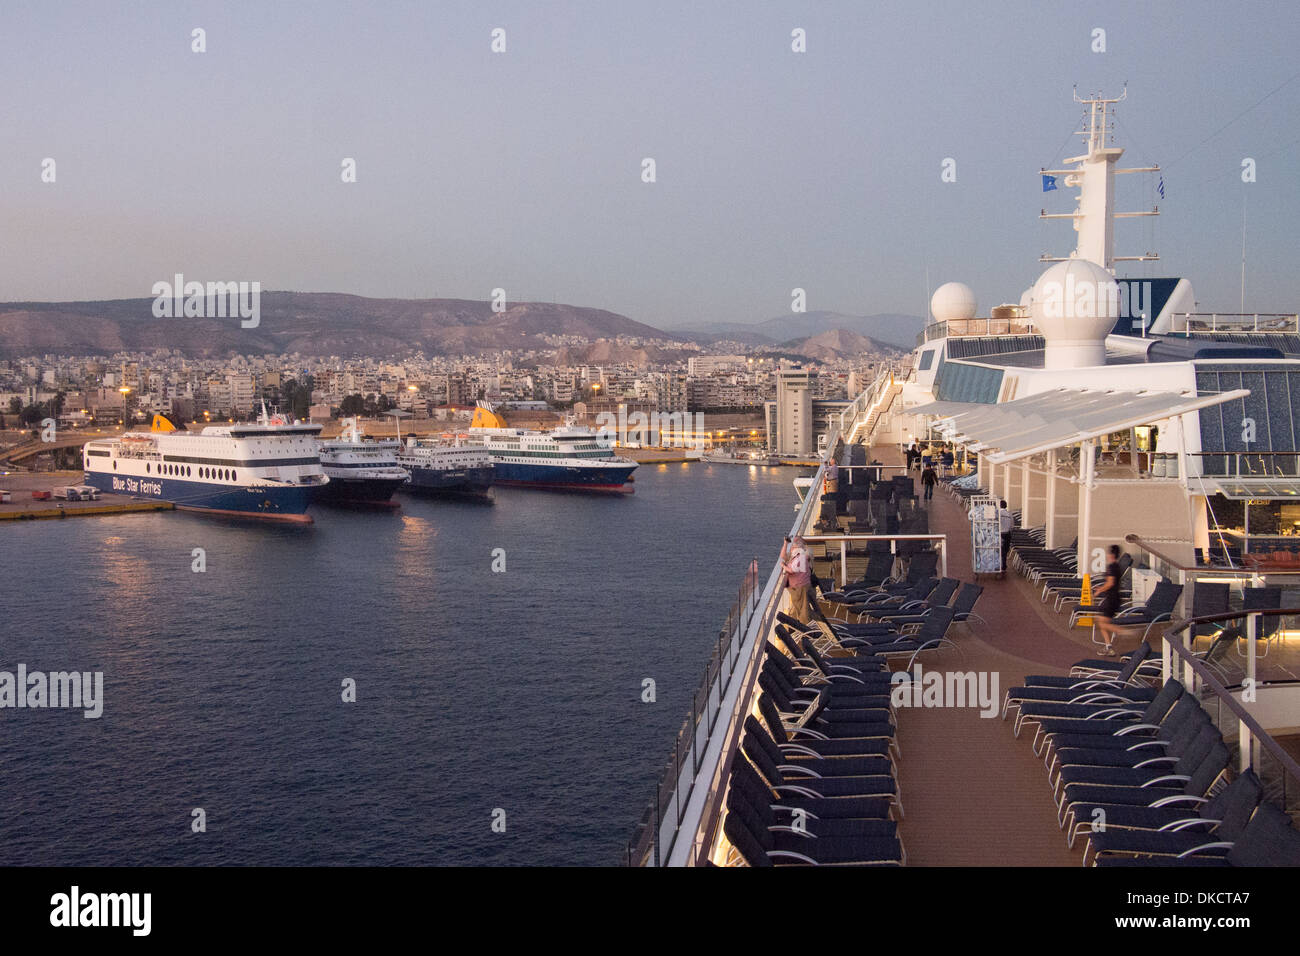 View from the Celebrity Silhouette cruise ship of the port of Piraeus, near Athens, Greece. Stock Photo